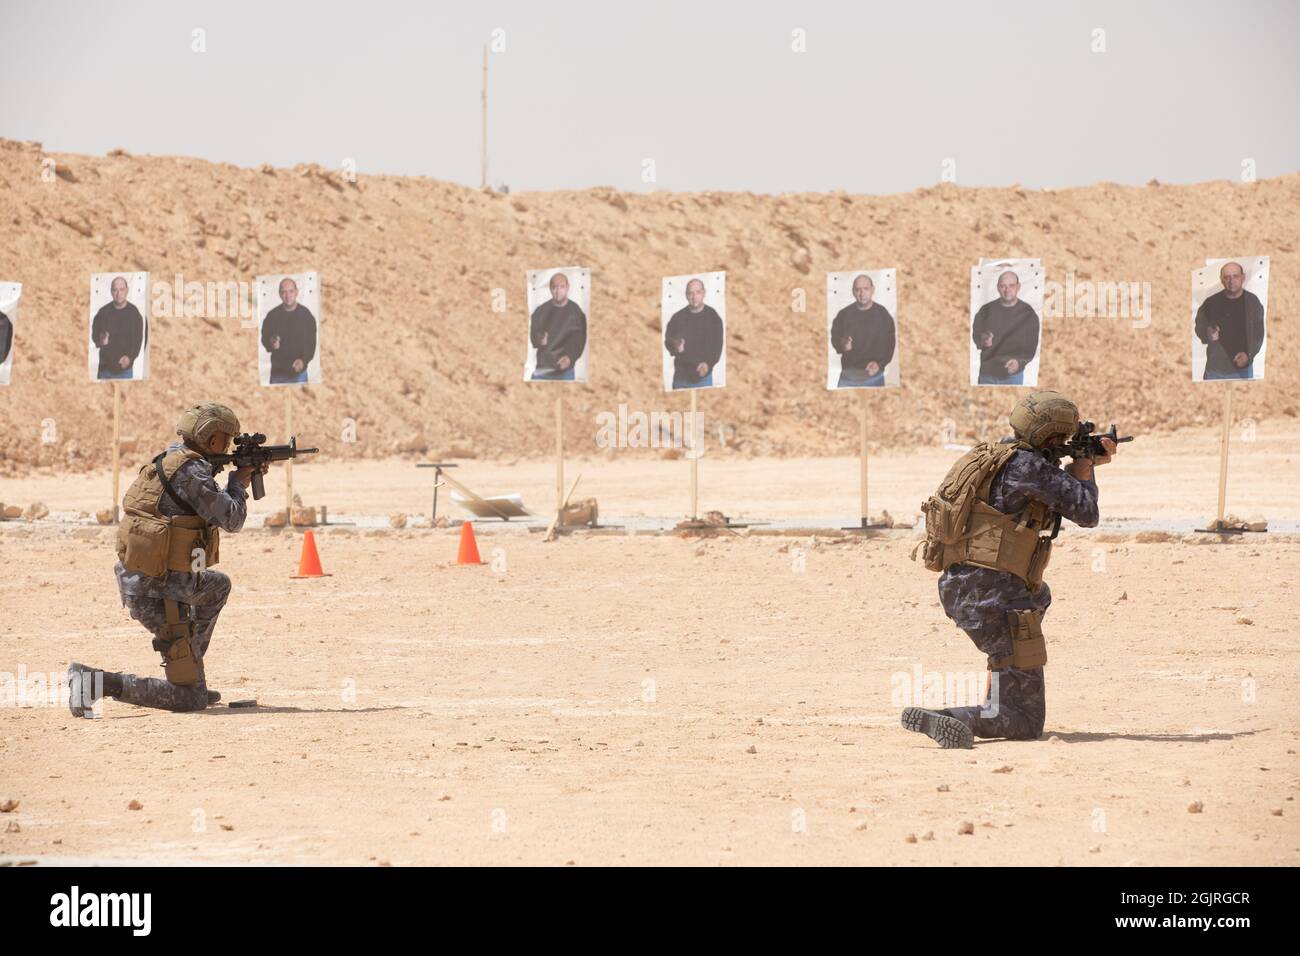 Jordanian Naval Special Forces executes live-fire moving drills during Bright Star 21 (BS21) at Mohamed Naguib Military Base (MNMB), Egypt, Sept. 7, 2021. BS21 promotes faster responses to regional threats, while building a framework of countering terrorism. (U.S. Army photo by Spc. Amber Cobena) Stock Photo